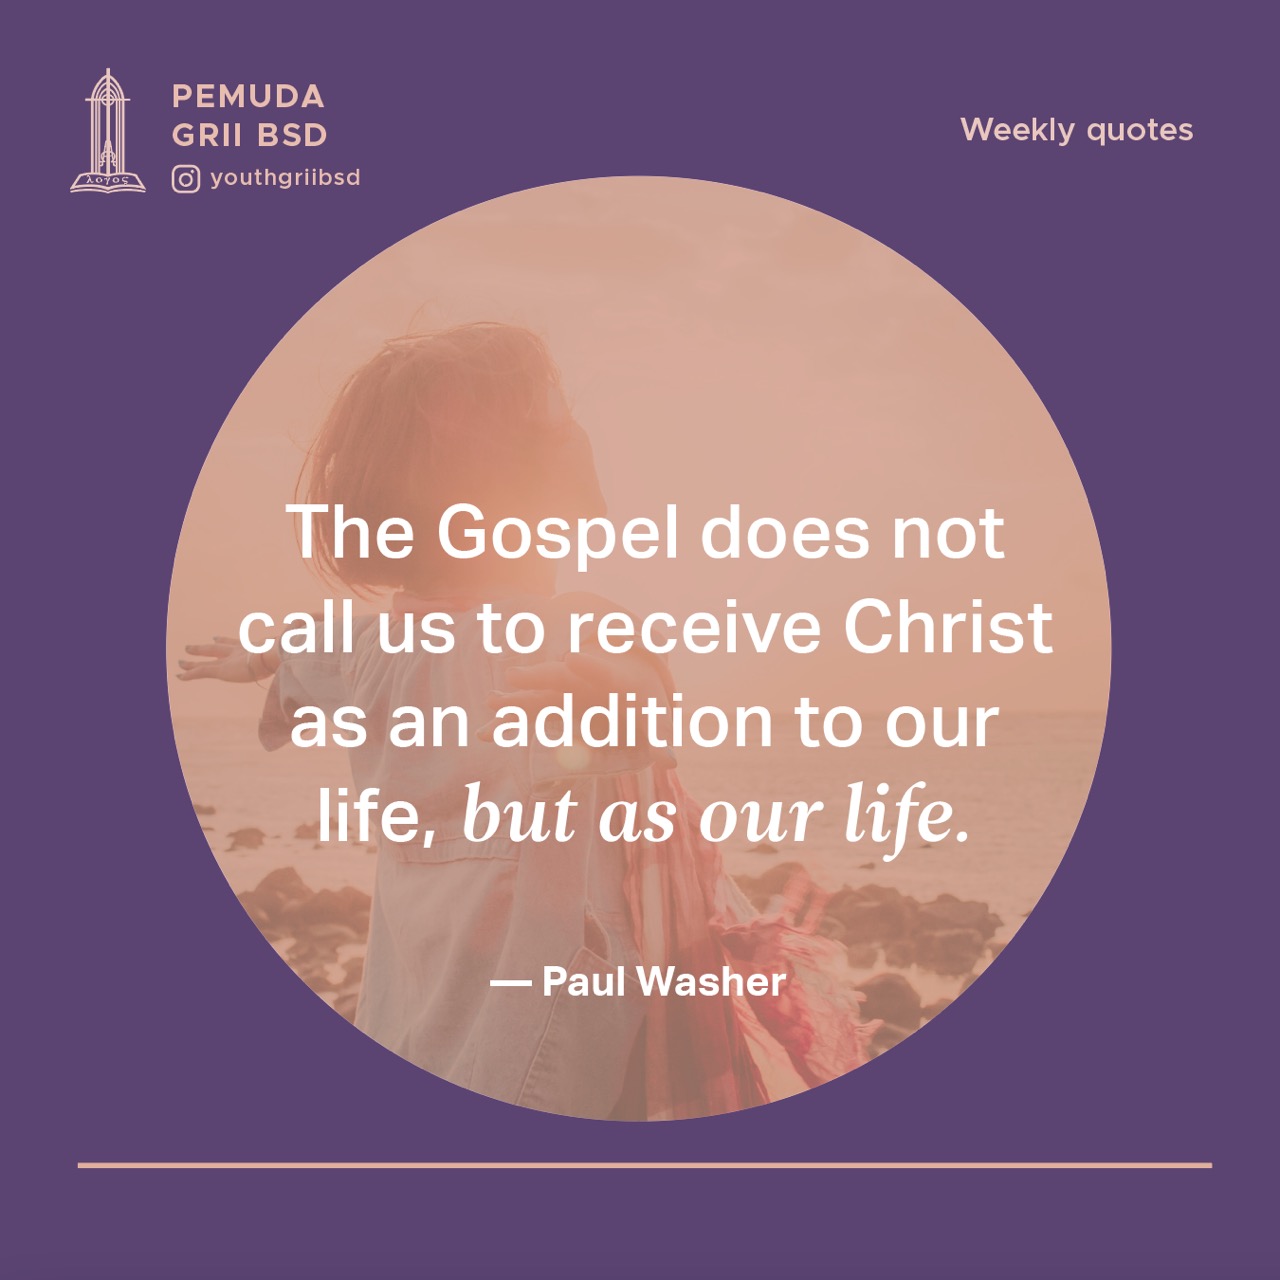 The Gospel does not call us to receive Christ as an addition to our life, but as our life.